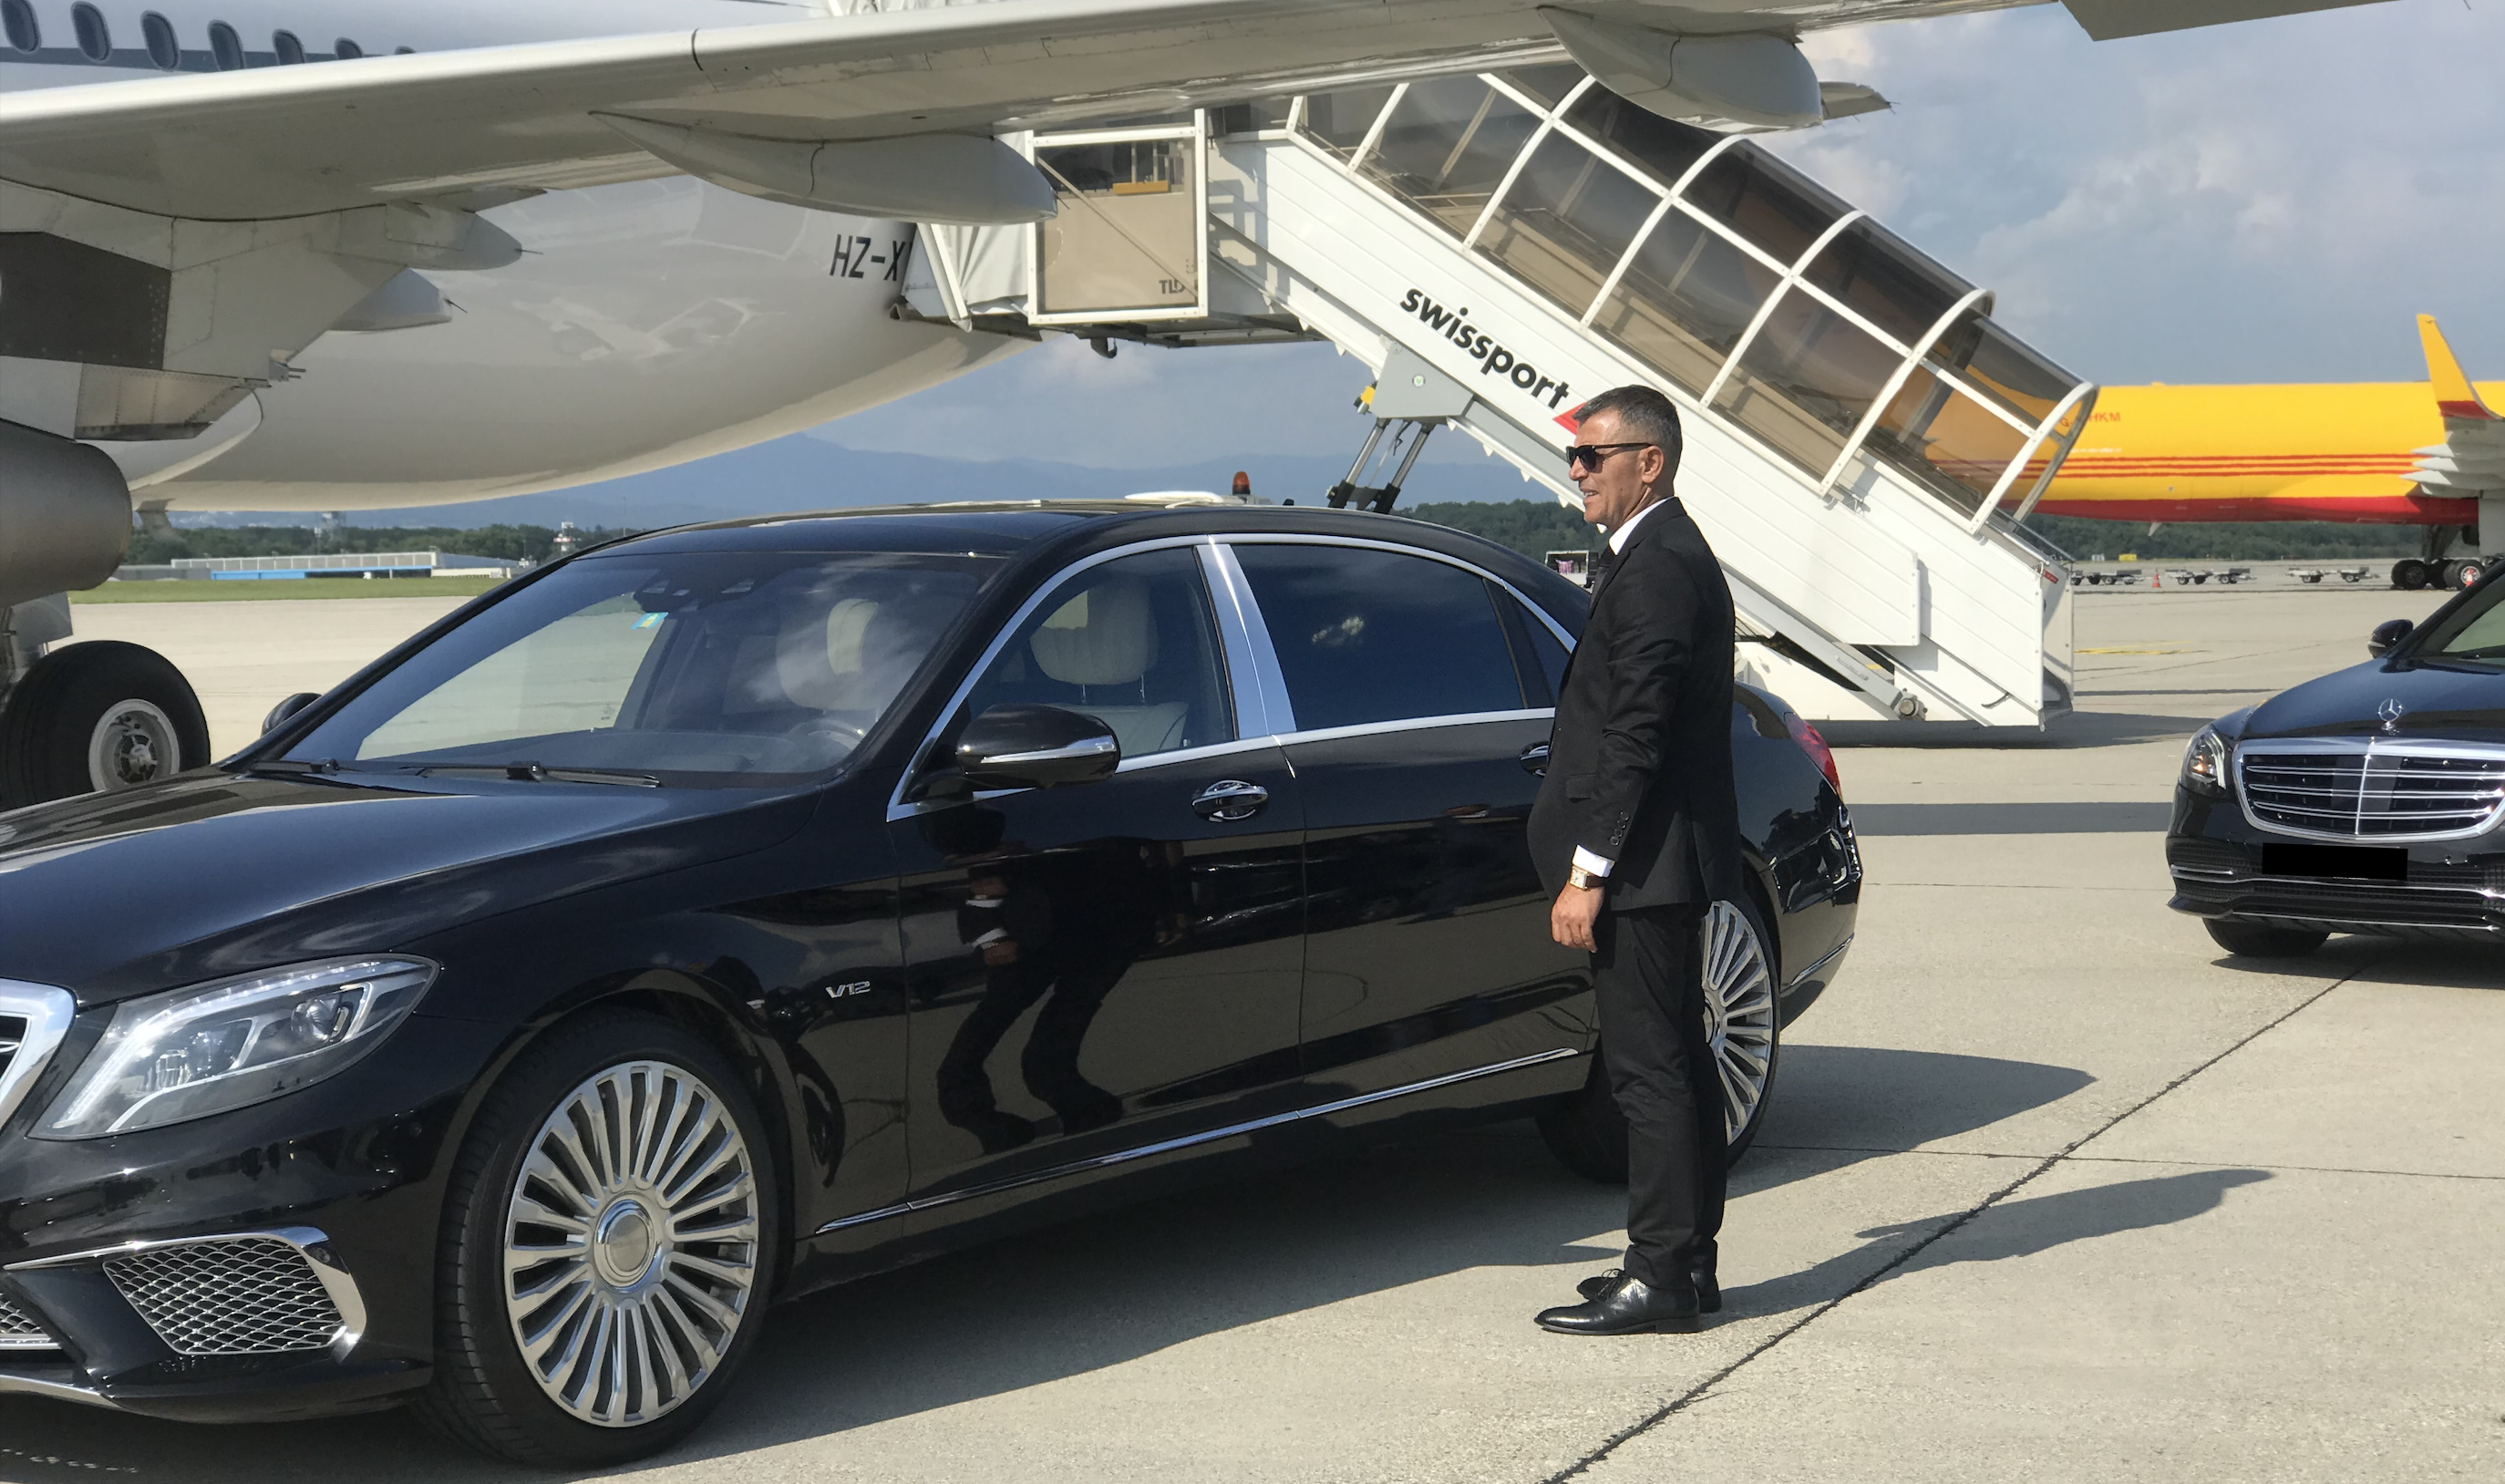 Basic elements of a luxury chauffeur service